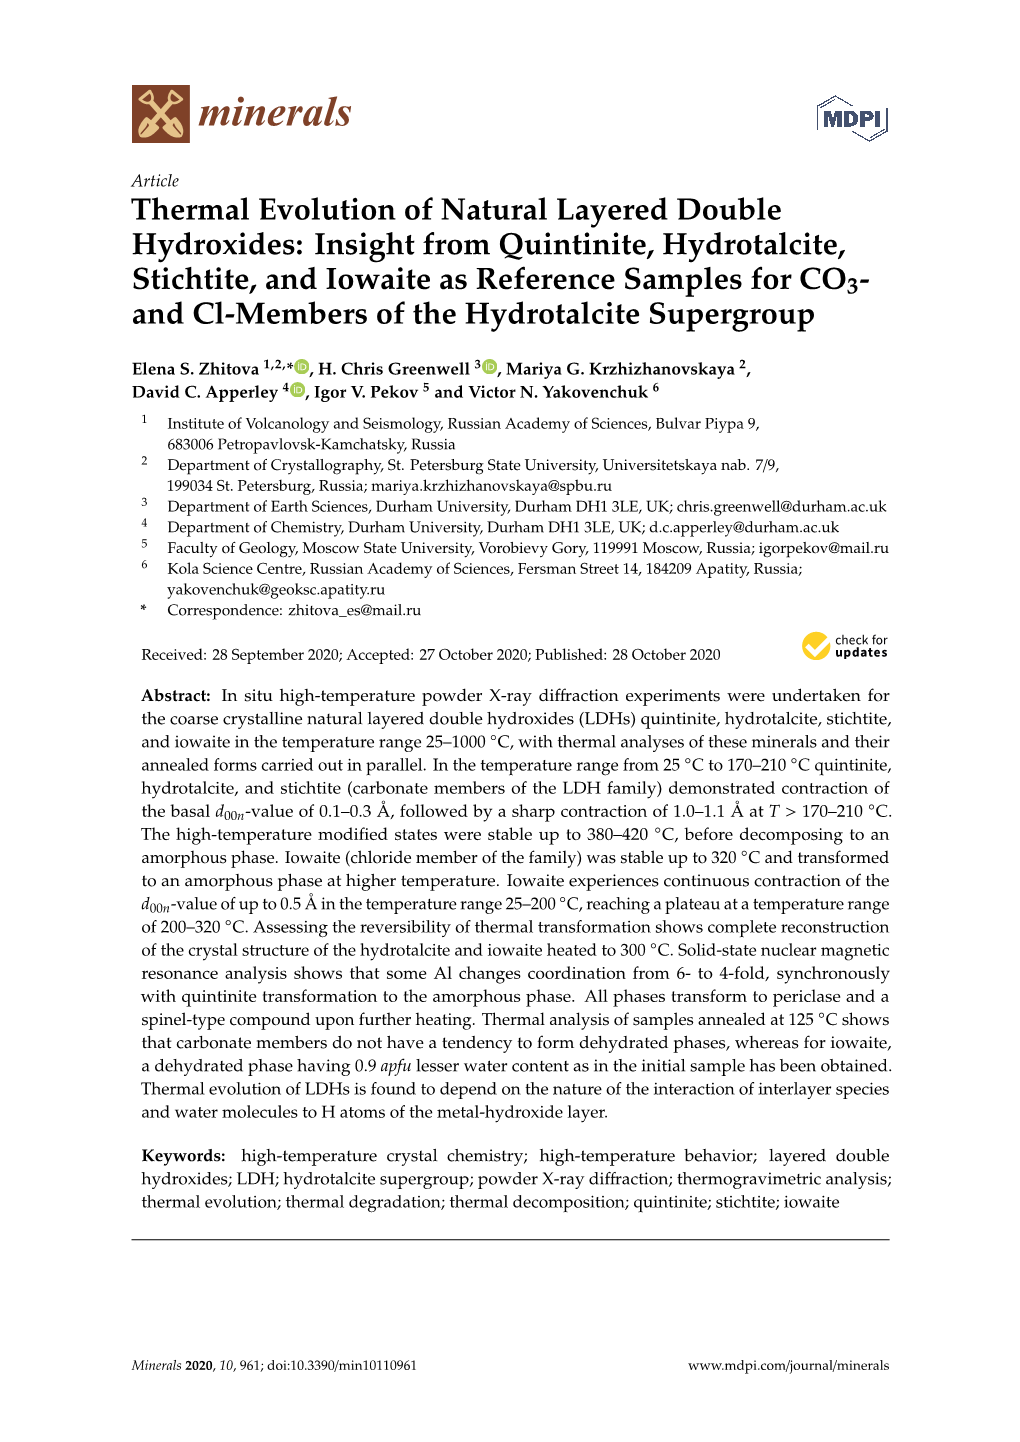 Insight from Quintinite, Hydrotalcite, Stichtite, and Iowaite As Reference Samples for CO3- and Cl-Members of the Hydrotalcite Supergroup